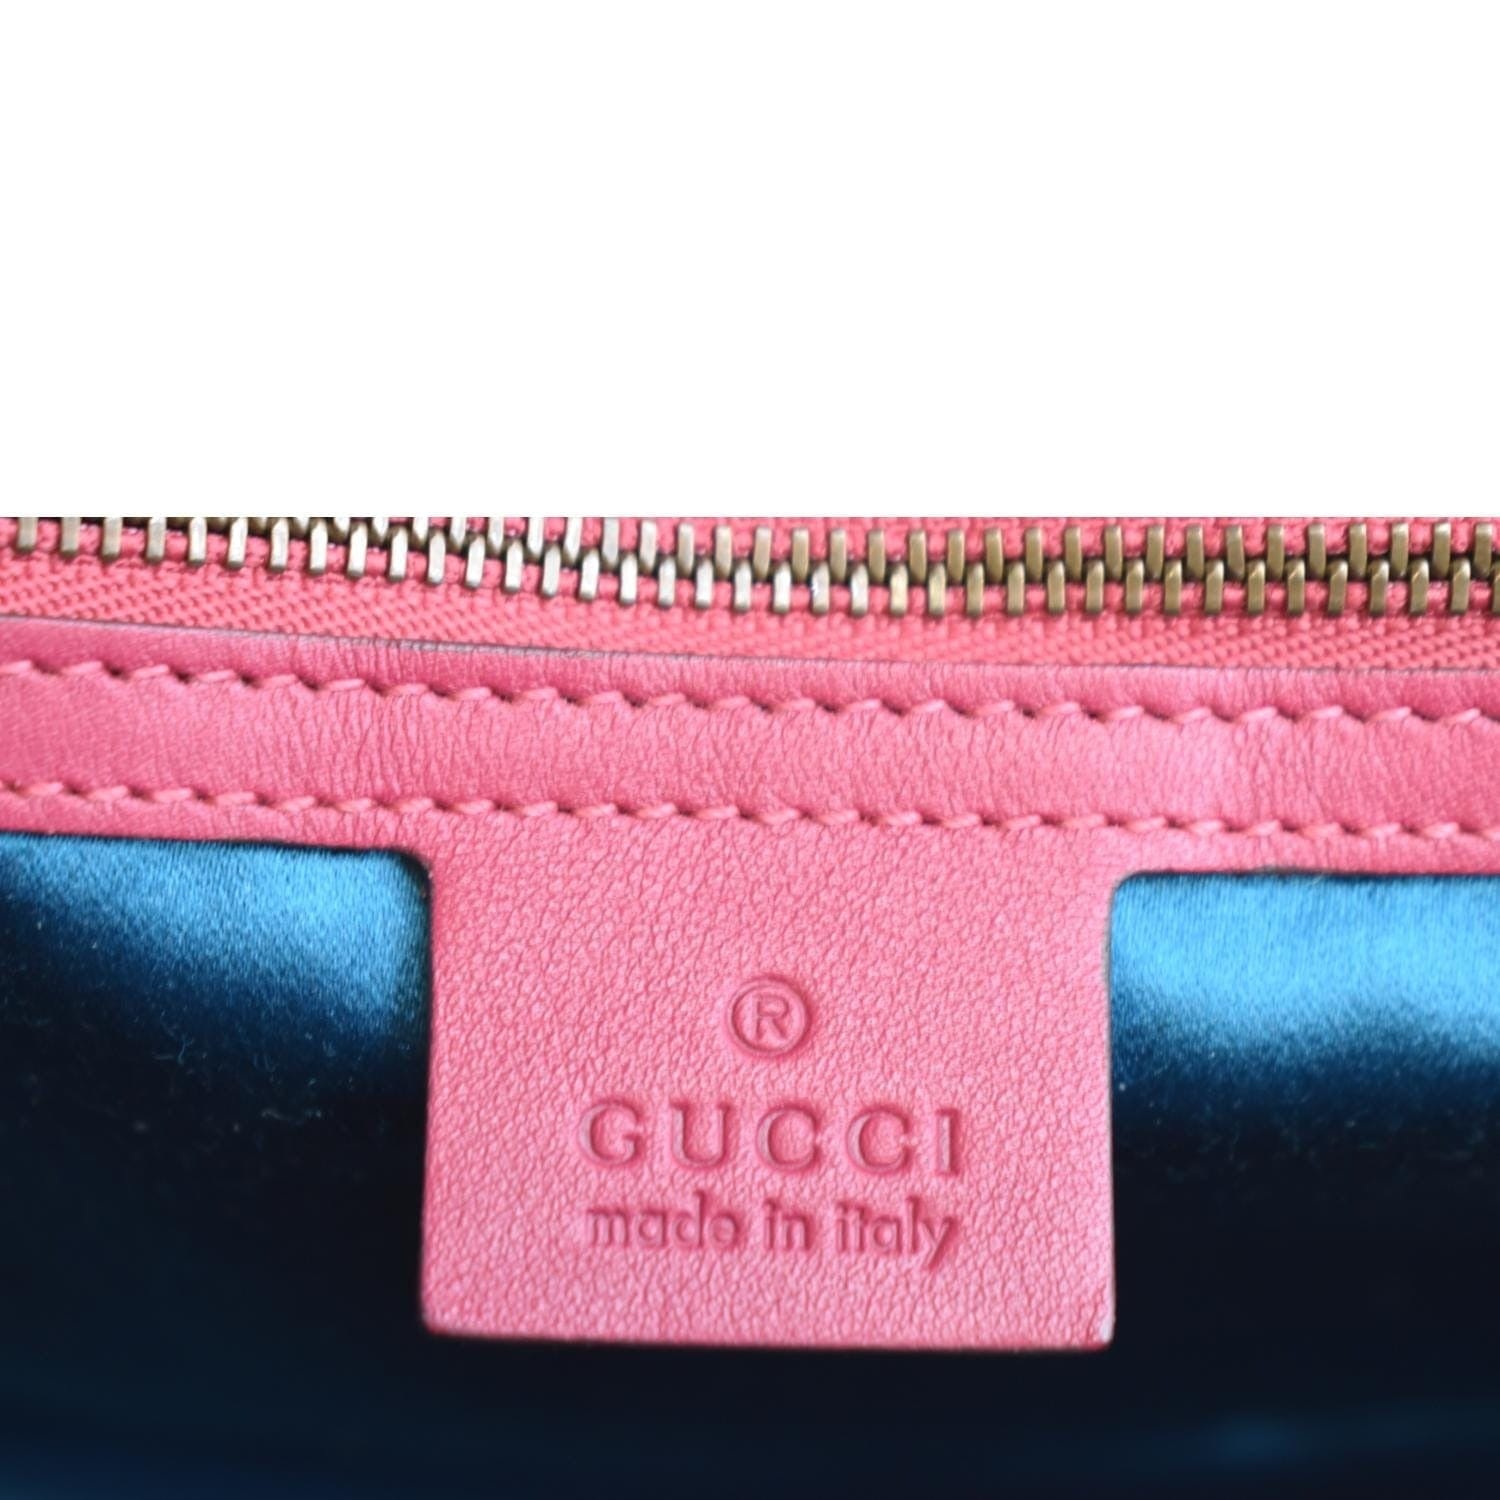 Gucci, Bags, Authentic Light Pink Gucci Wallet